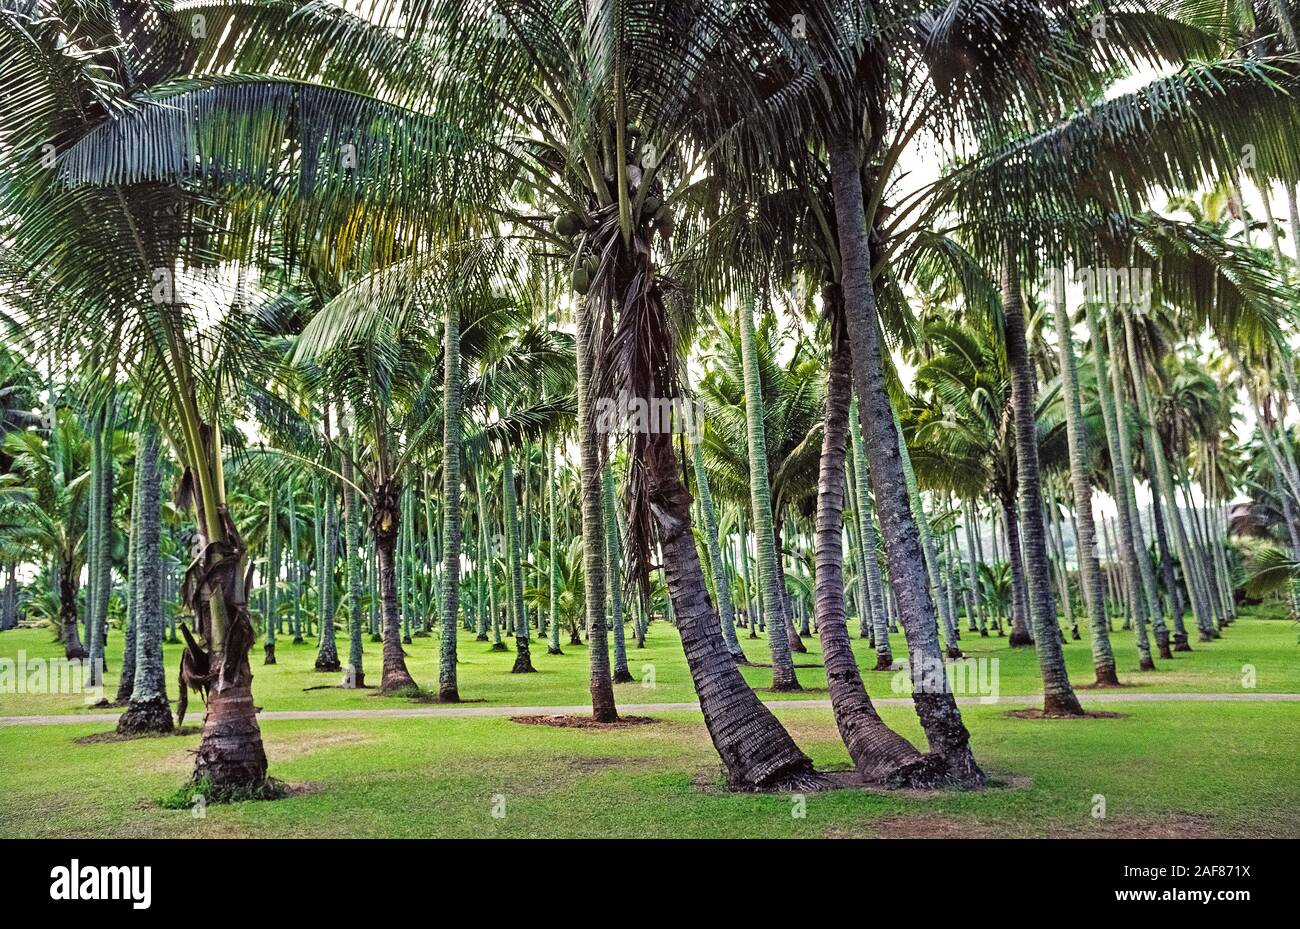 One of the most valuable trees for ancient Hawaiians was the Coconut Palm (Cocos nucifera), like these that having long been growing in a grove of 2,000 palm trees on Kauai, one of the eight major islands in Hawaii, USA. Brought to the Aloha State by Hawaii's Polynesian settlers, coconut trees provided food, liquid nourishment, and building materials. The towering palms reach an average height of 60 feet (18 meters) but can grow as tall as 100 feet (30 meters). The average lifespan of the tree is 60 to 70 years, although some coconut palms live for more than a century. Stock Photo